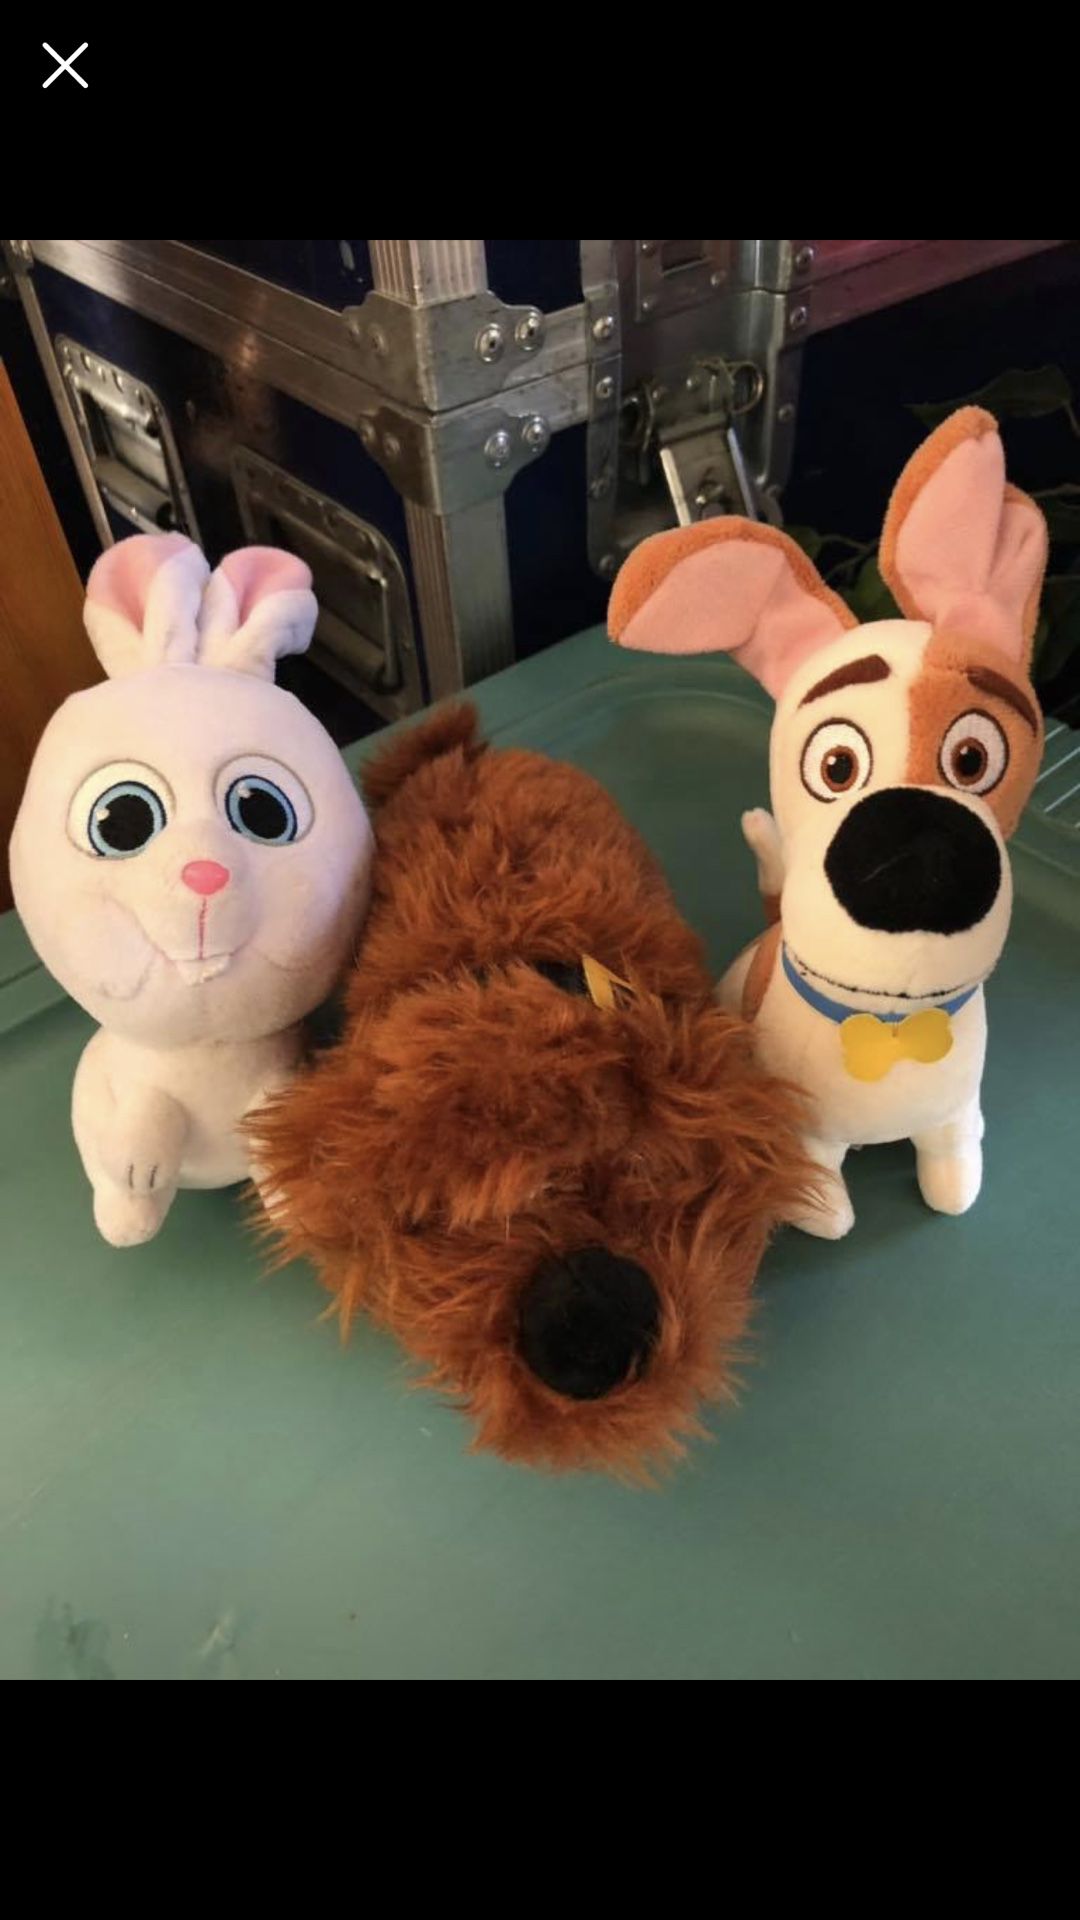 Plushies from movie imaginary friend